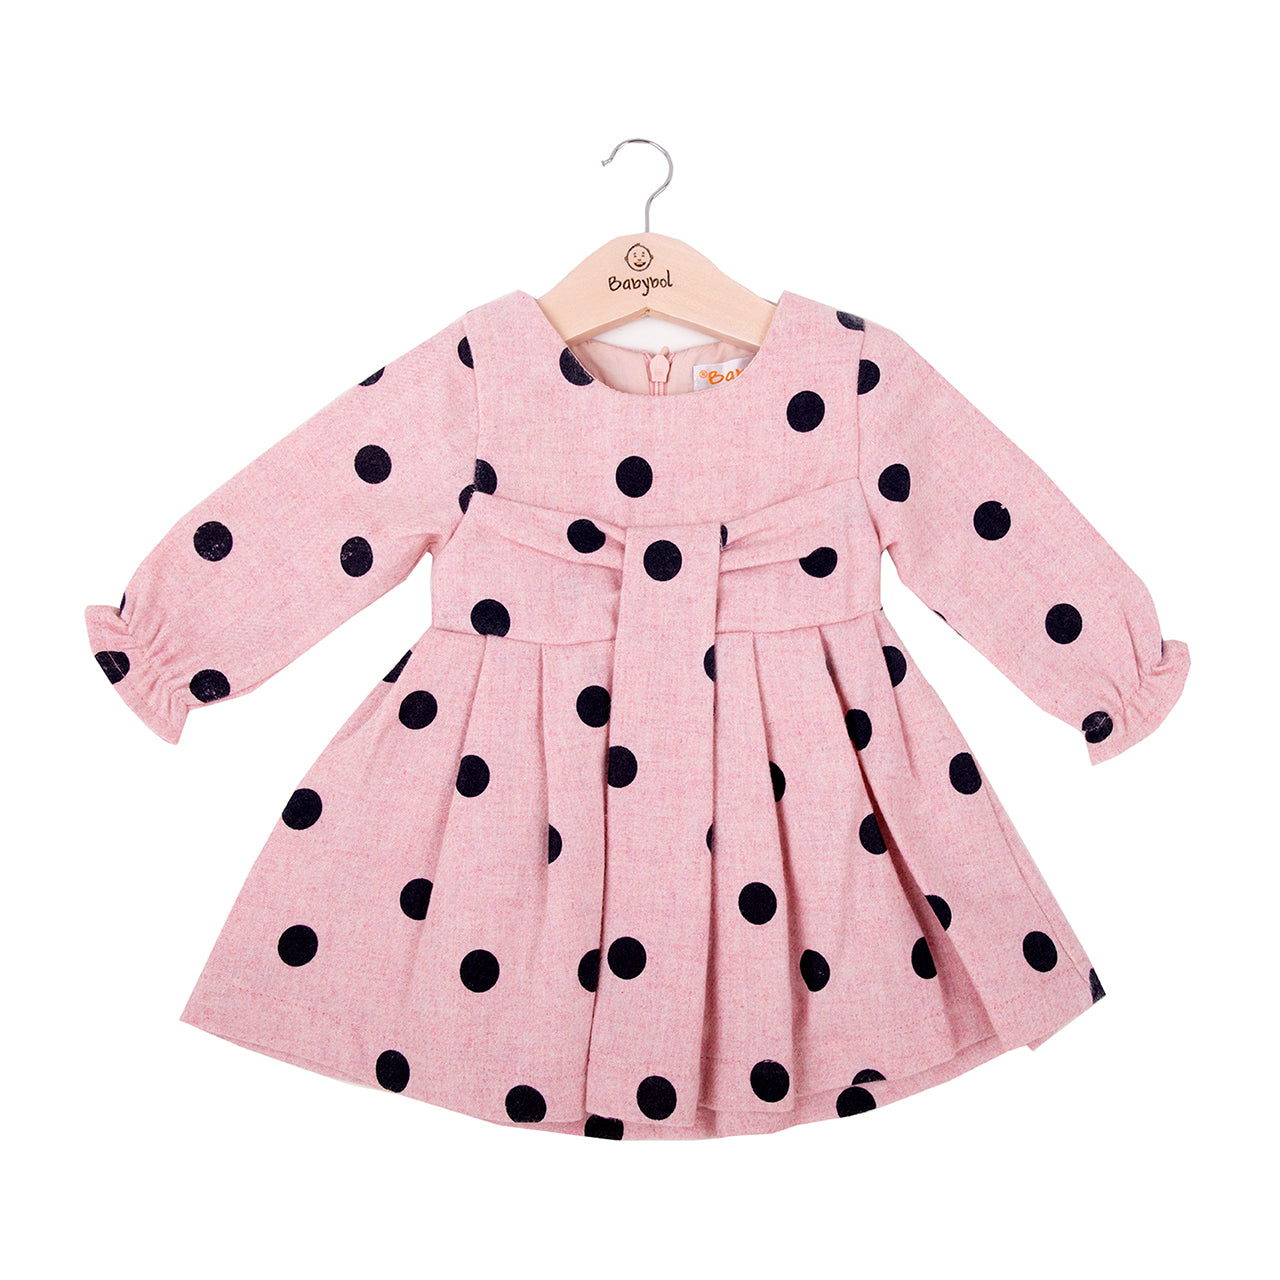 Pink spotted dress